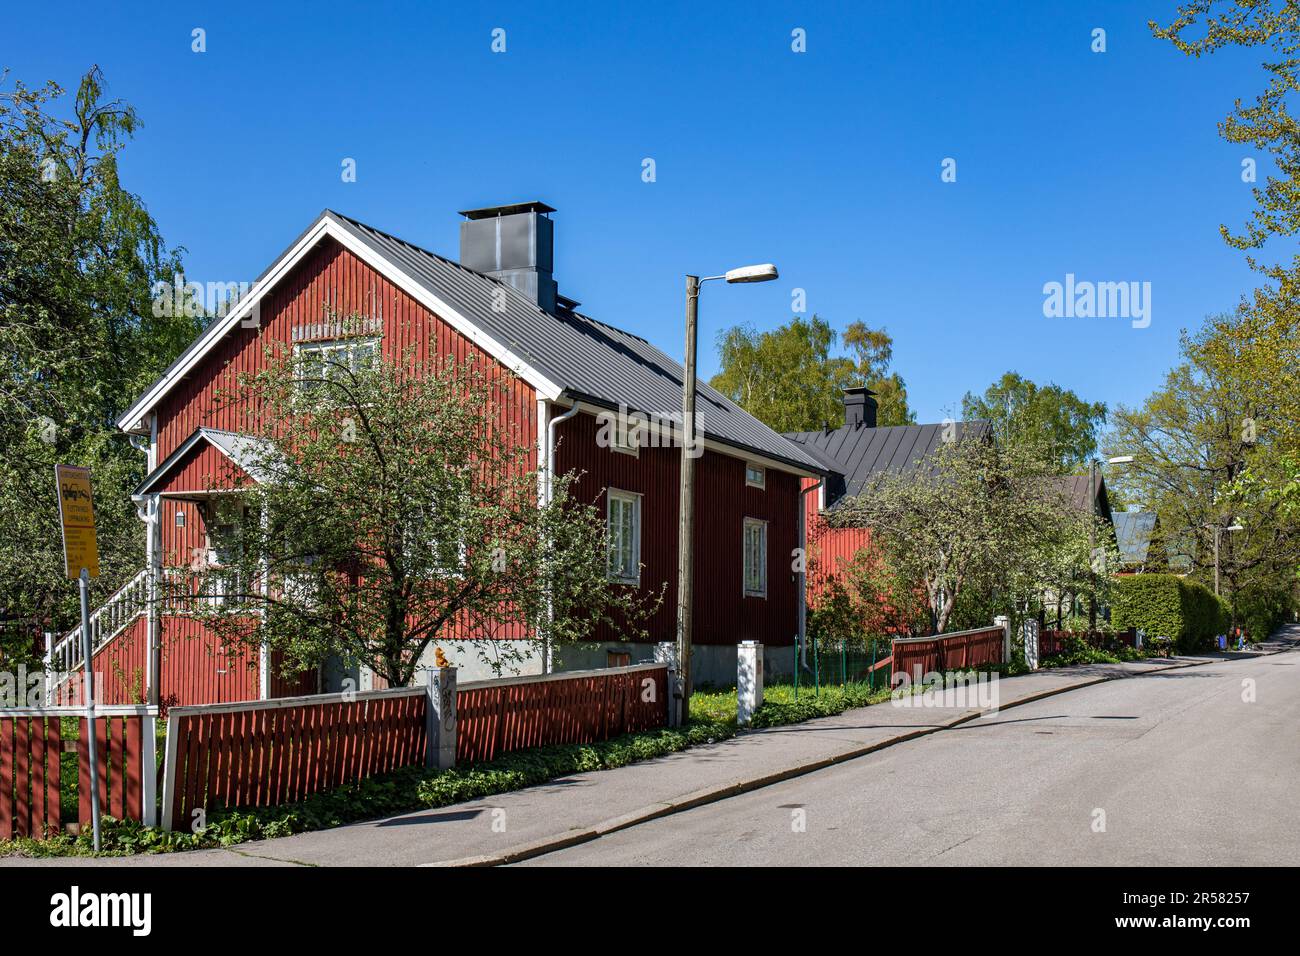 Residential wooden buildings against clear blue sky on a sunny late spring day at Siamintie in Toukola district of Helsinki, Finland Stock Photo